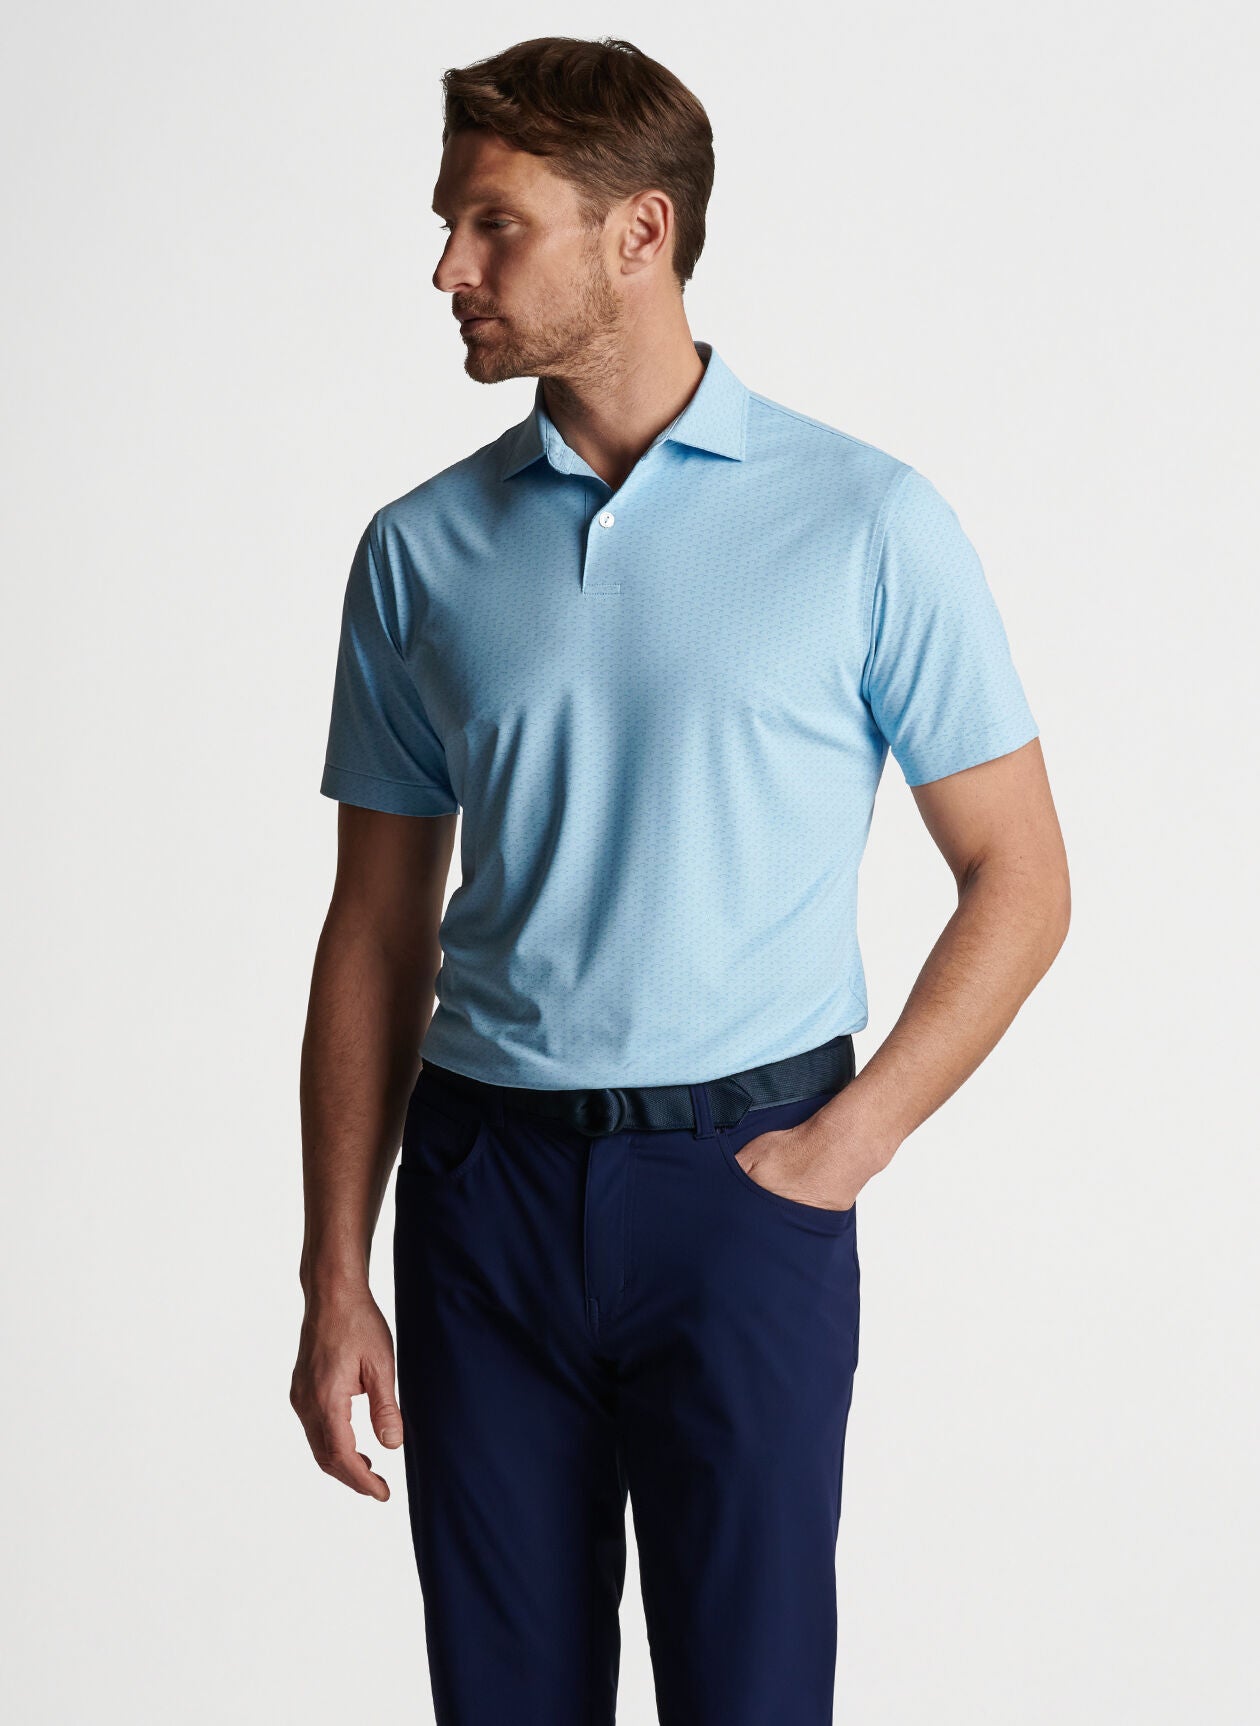 Spicer Performance Jersey Polo